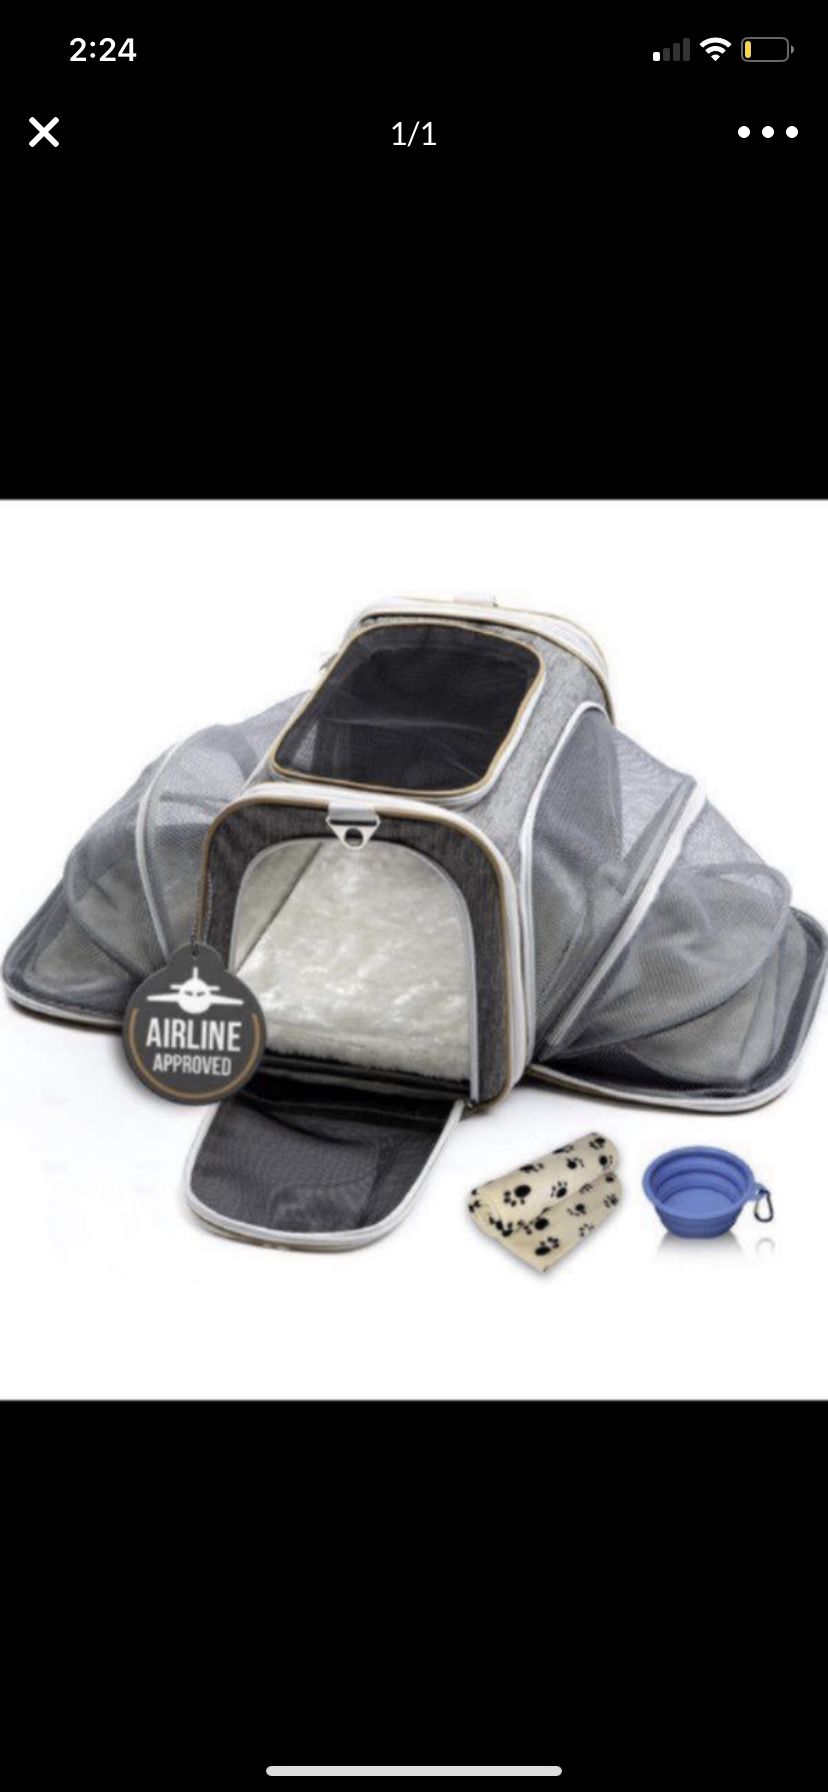 Pet Carrier - Airline approved